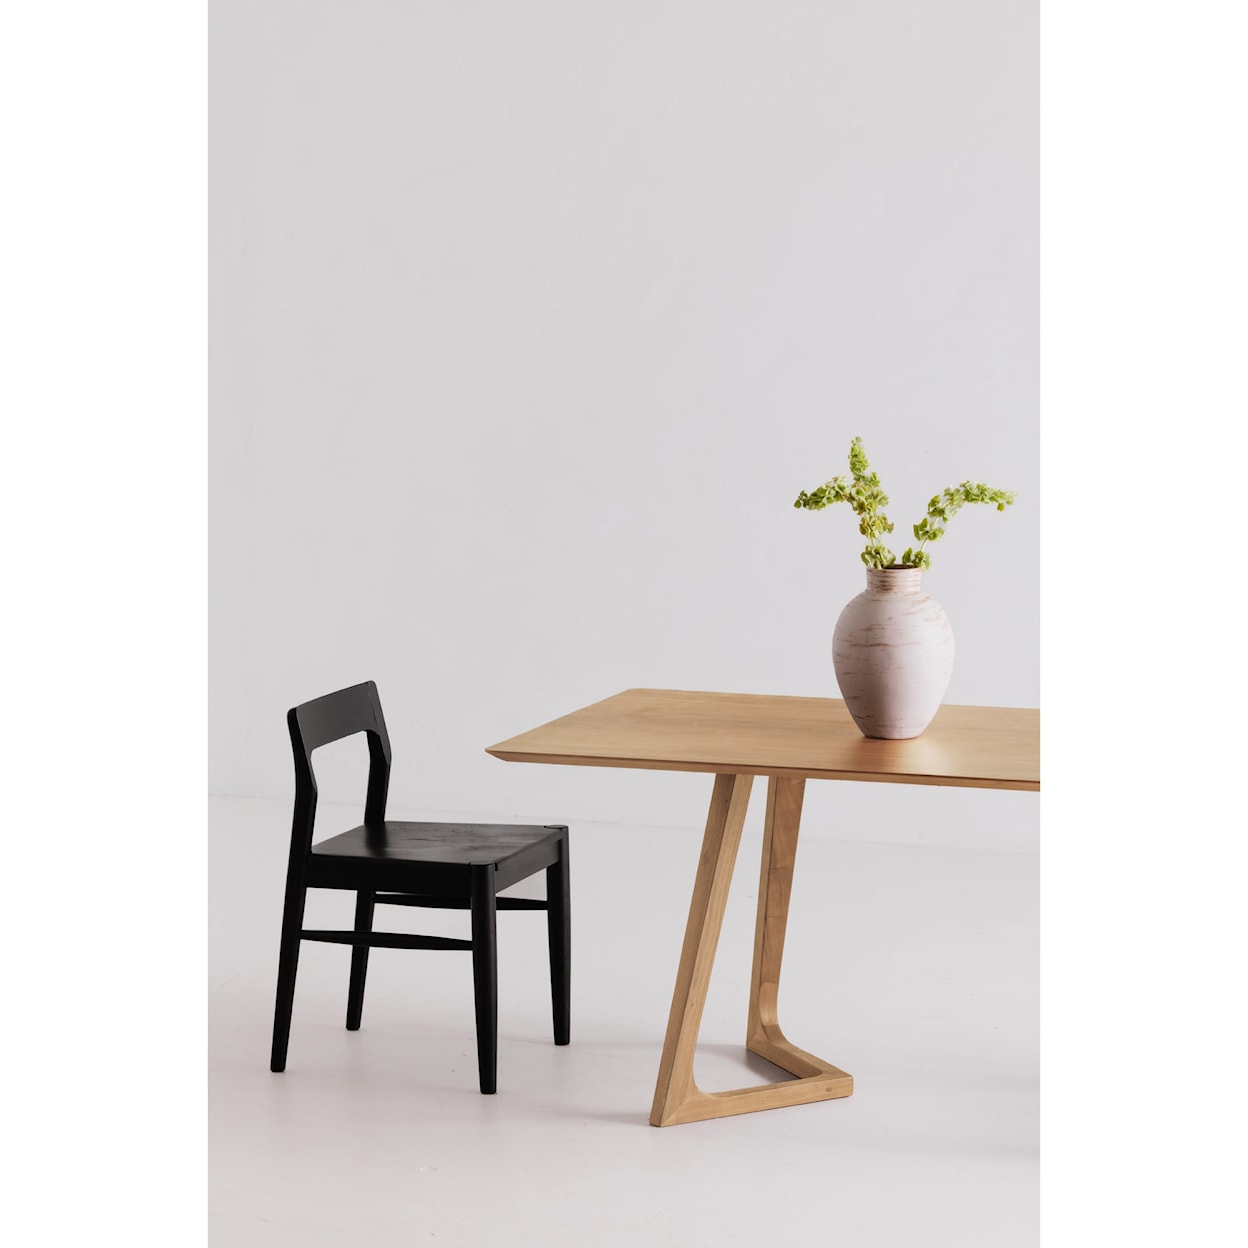 Moe's Home Collection Godenza Rectangular Dining Table